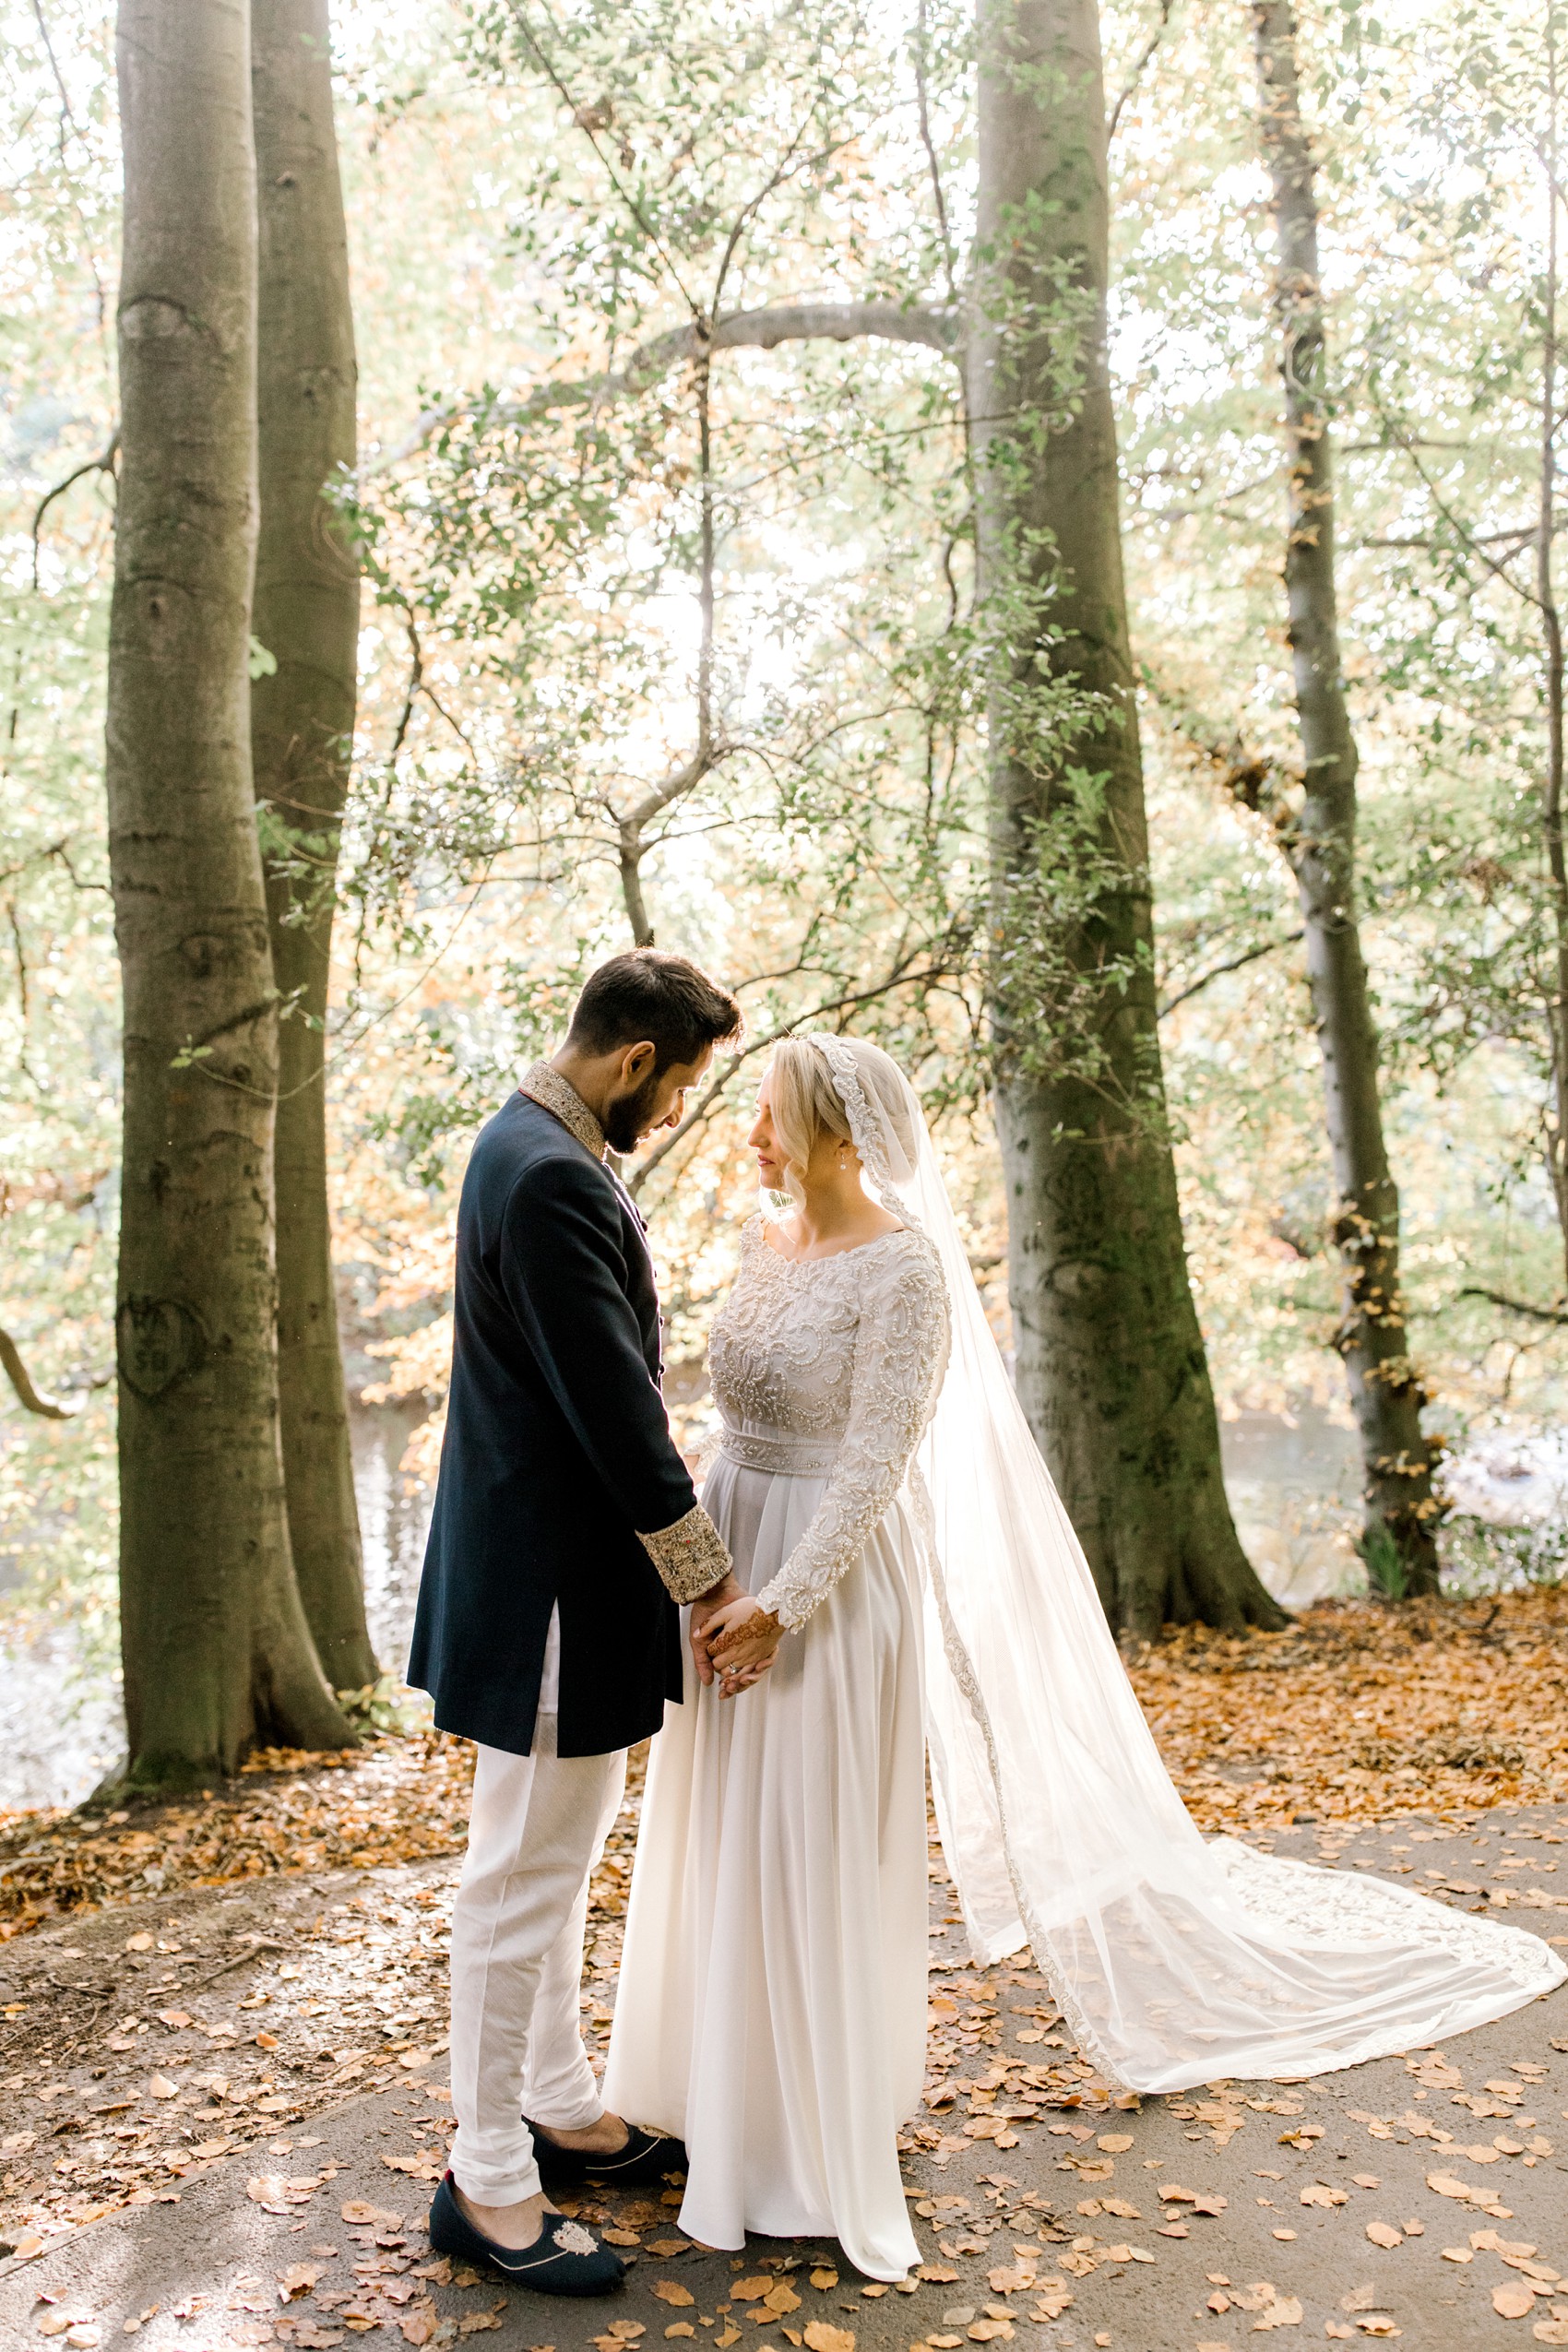  Pakistani Kashmiri Scottish multicultural fusion wedding - An Elegant and Multicultural Pakistani, Kashmiri and Scottish Fusion Wedding at Pollok Country House in the Autumn